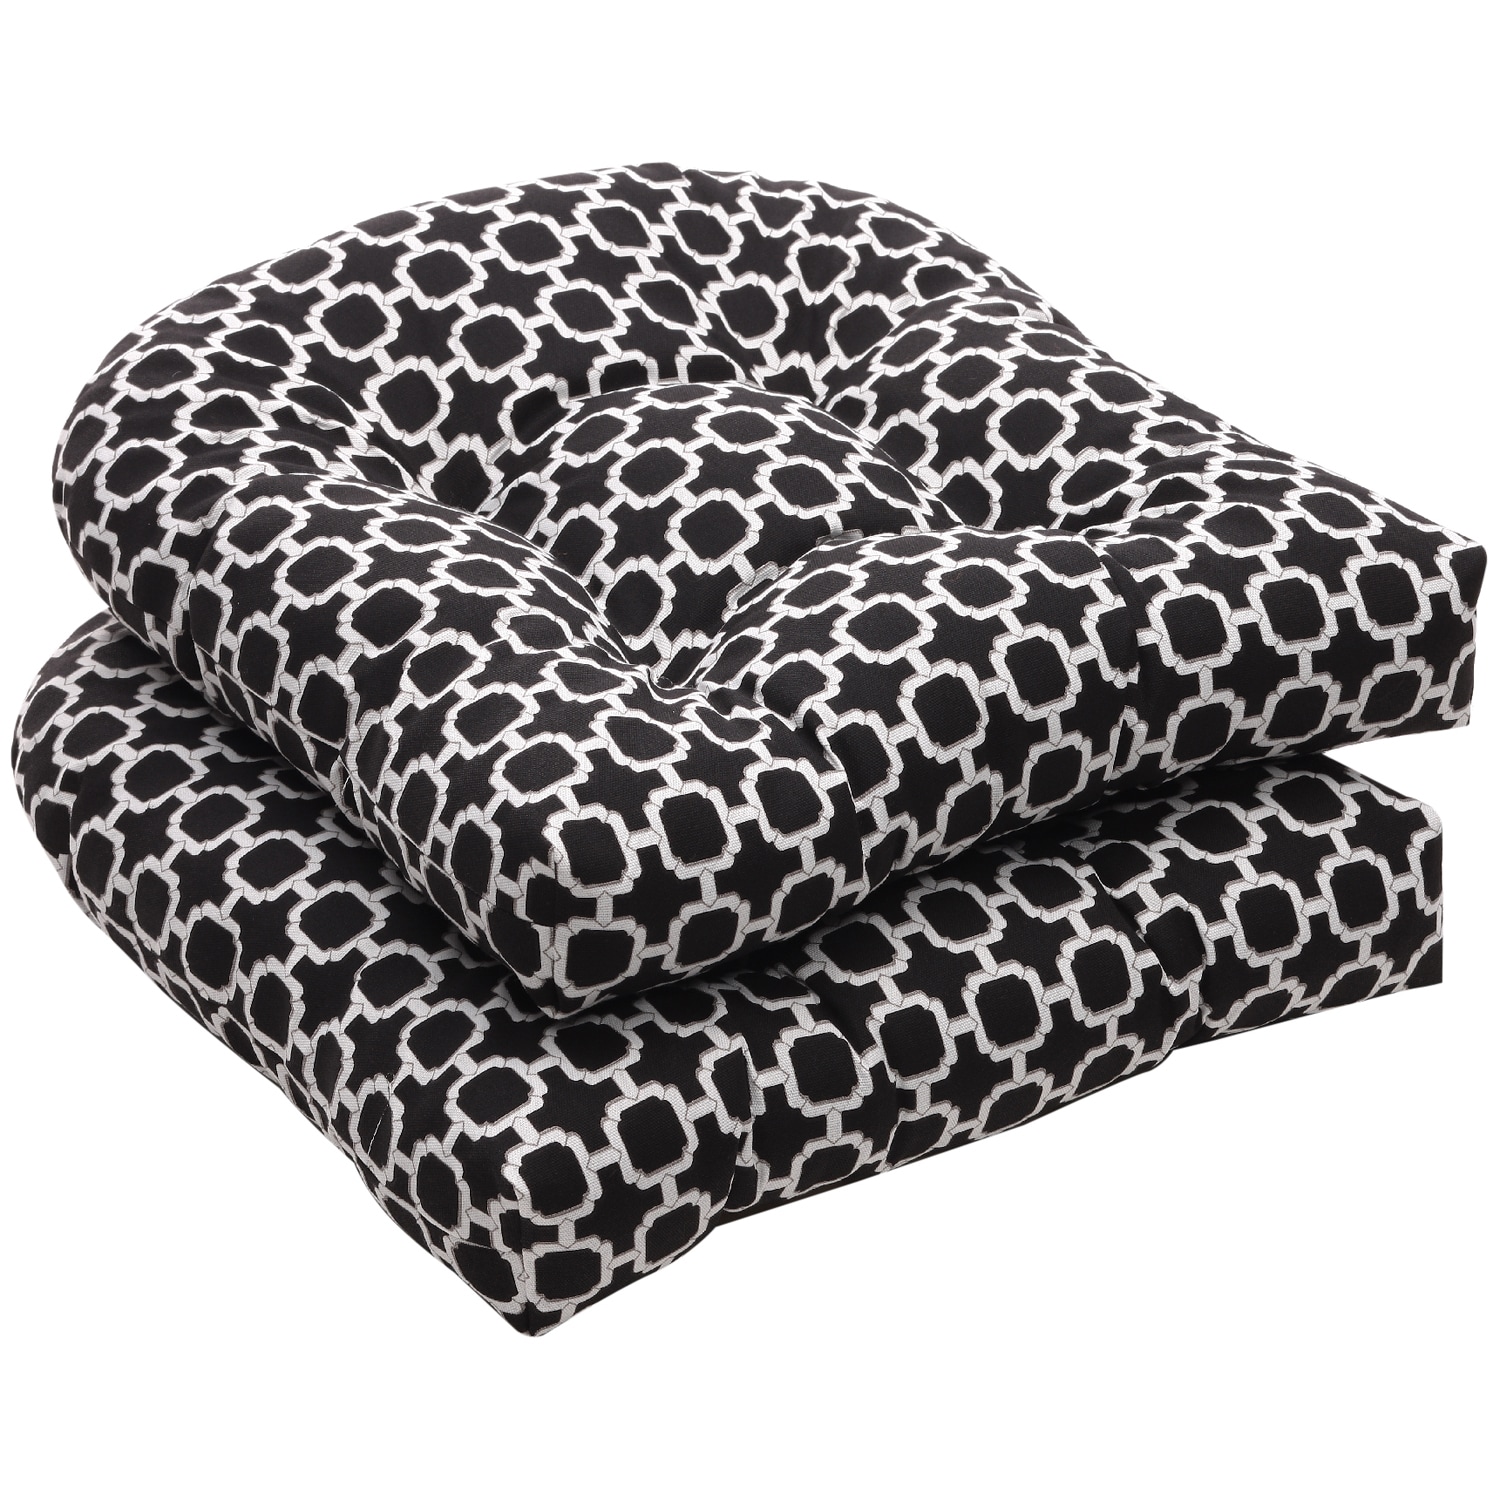 Pillow Perfect Outdoor Geometric Black/ White Wicker Seat Cushions (Set